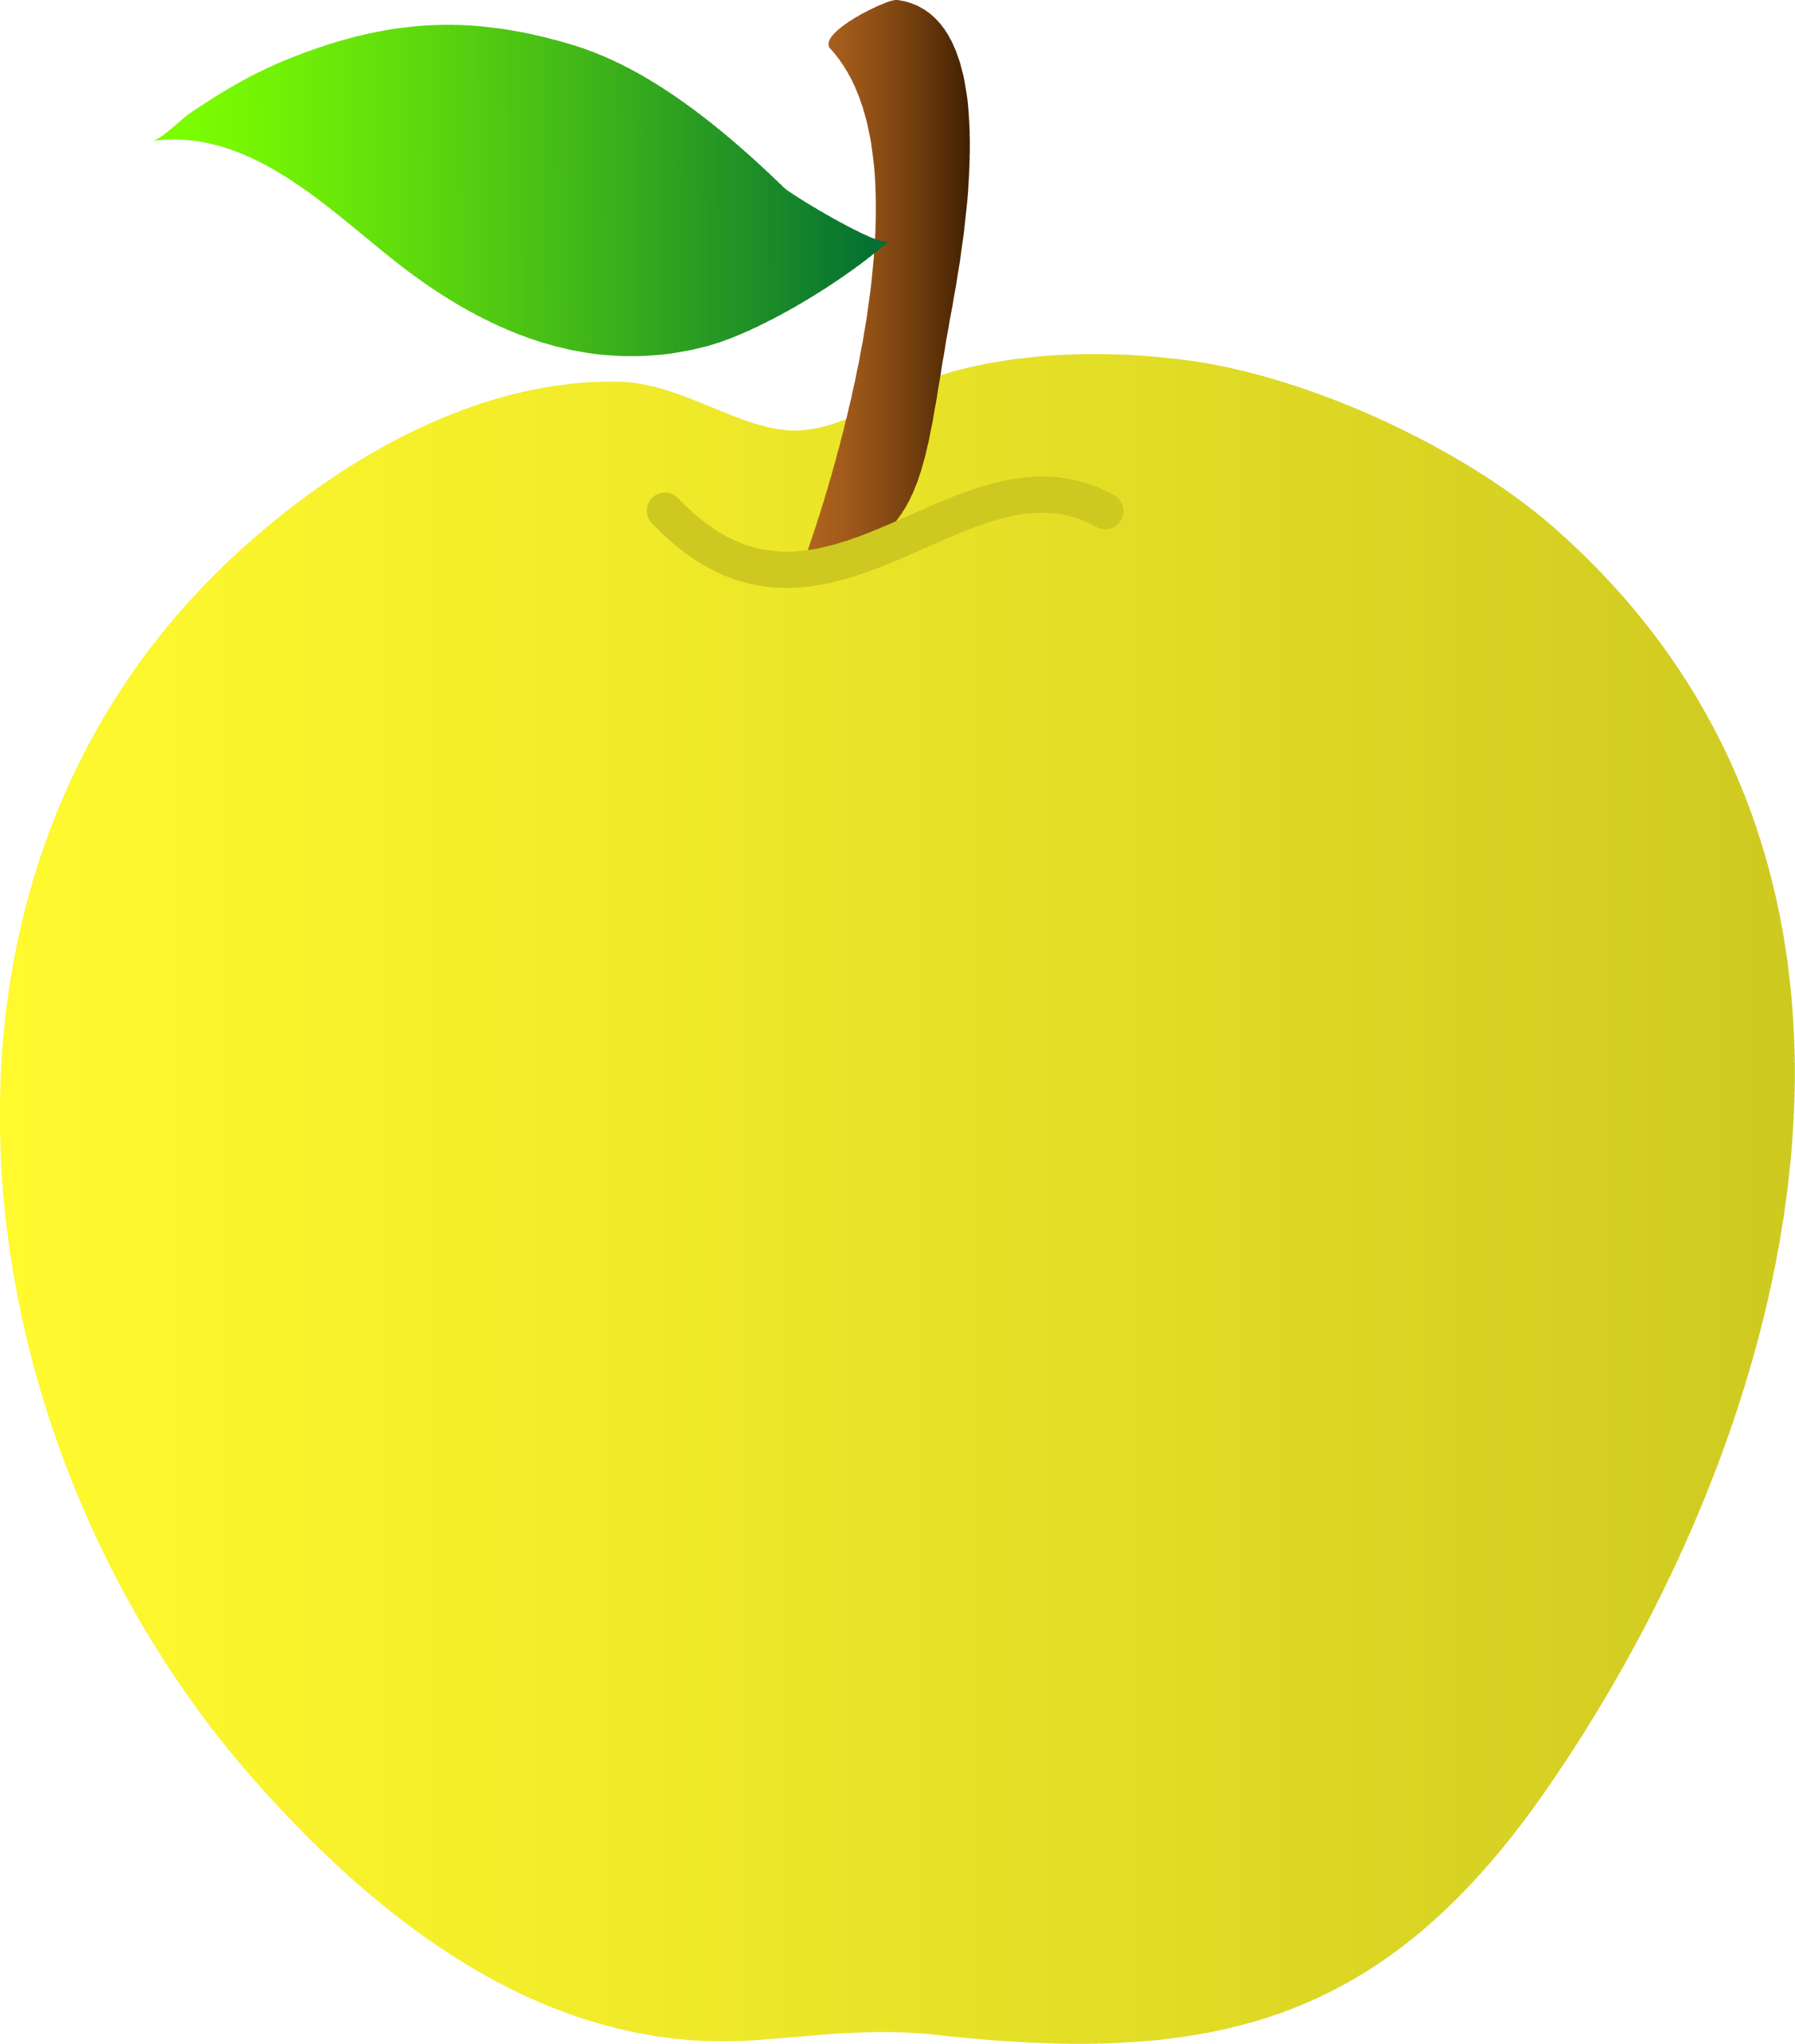 apple pictures clip art free - photo #40